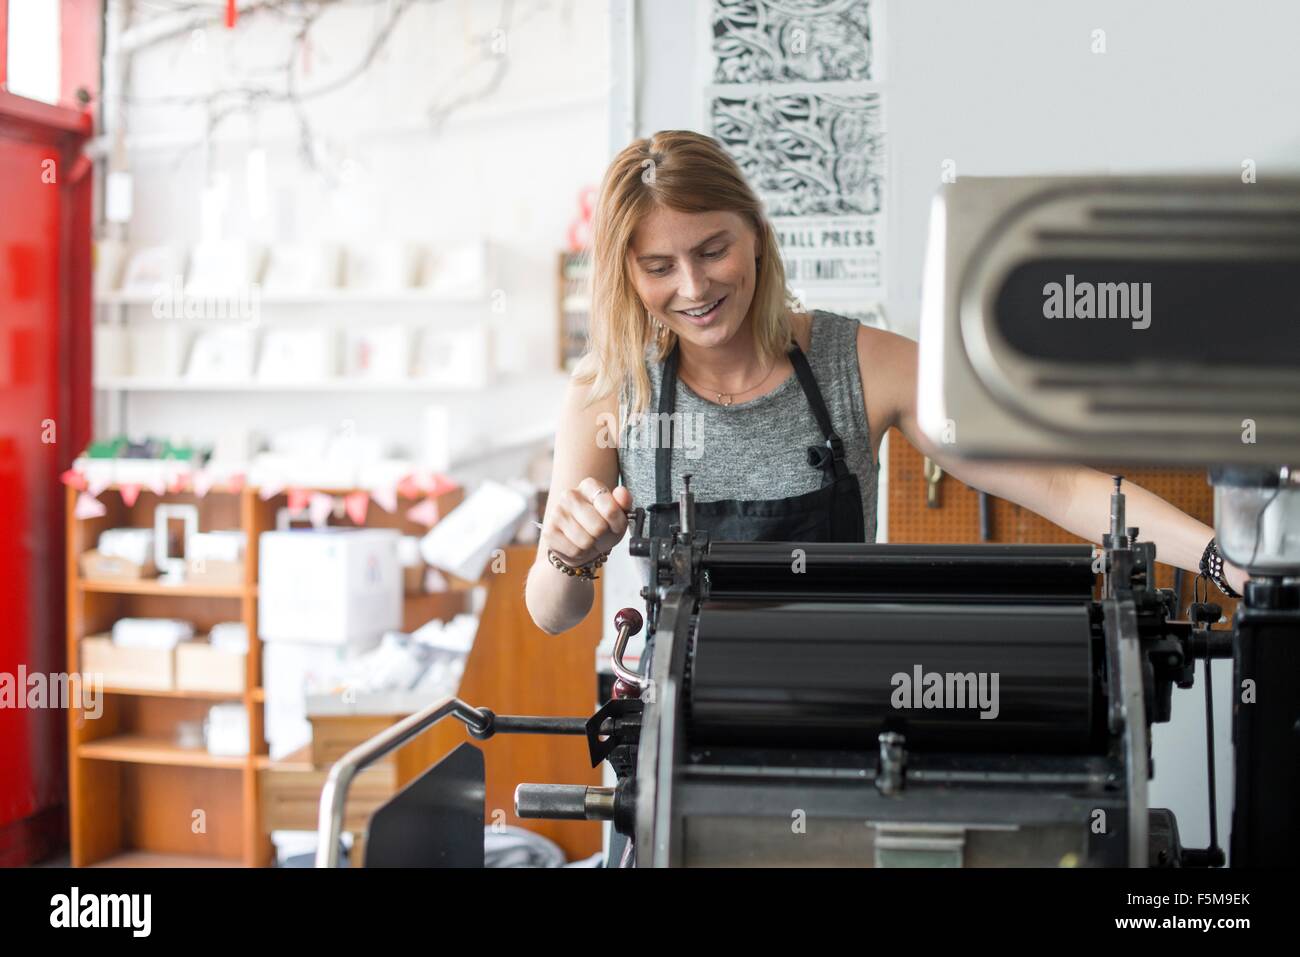 Young woman working on traditional letterpress print machine in workshop Stock Photo